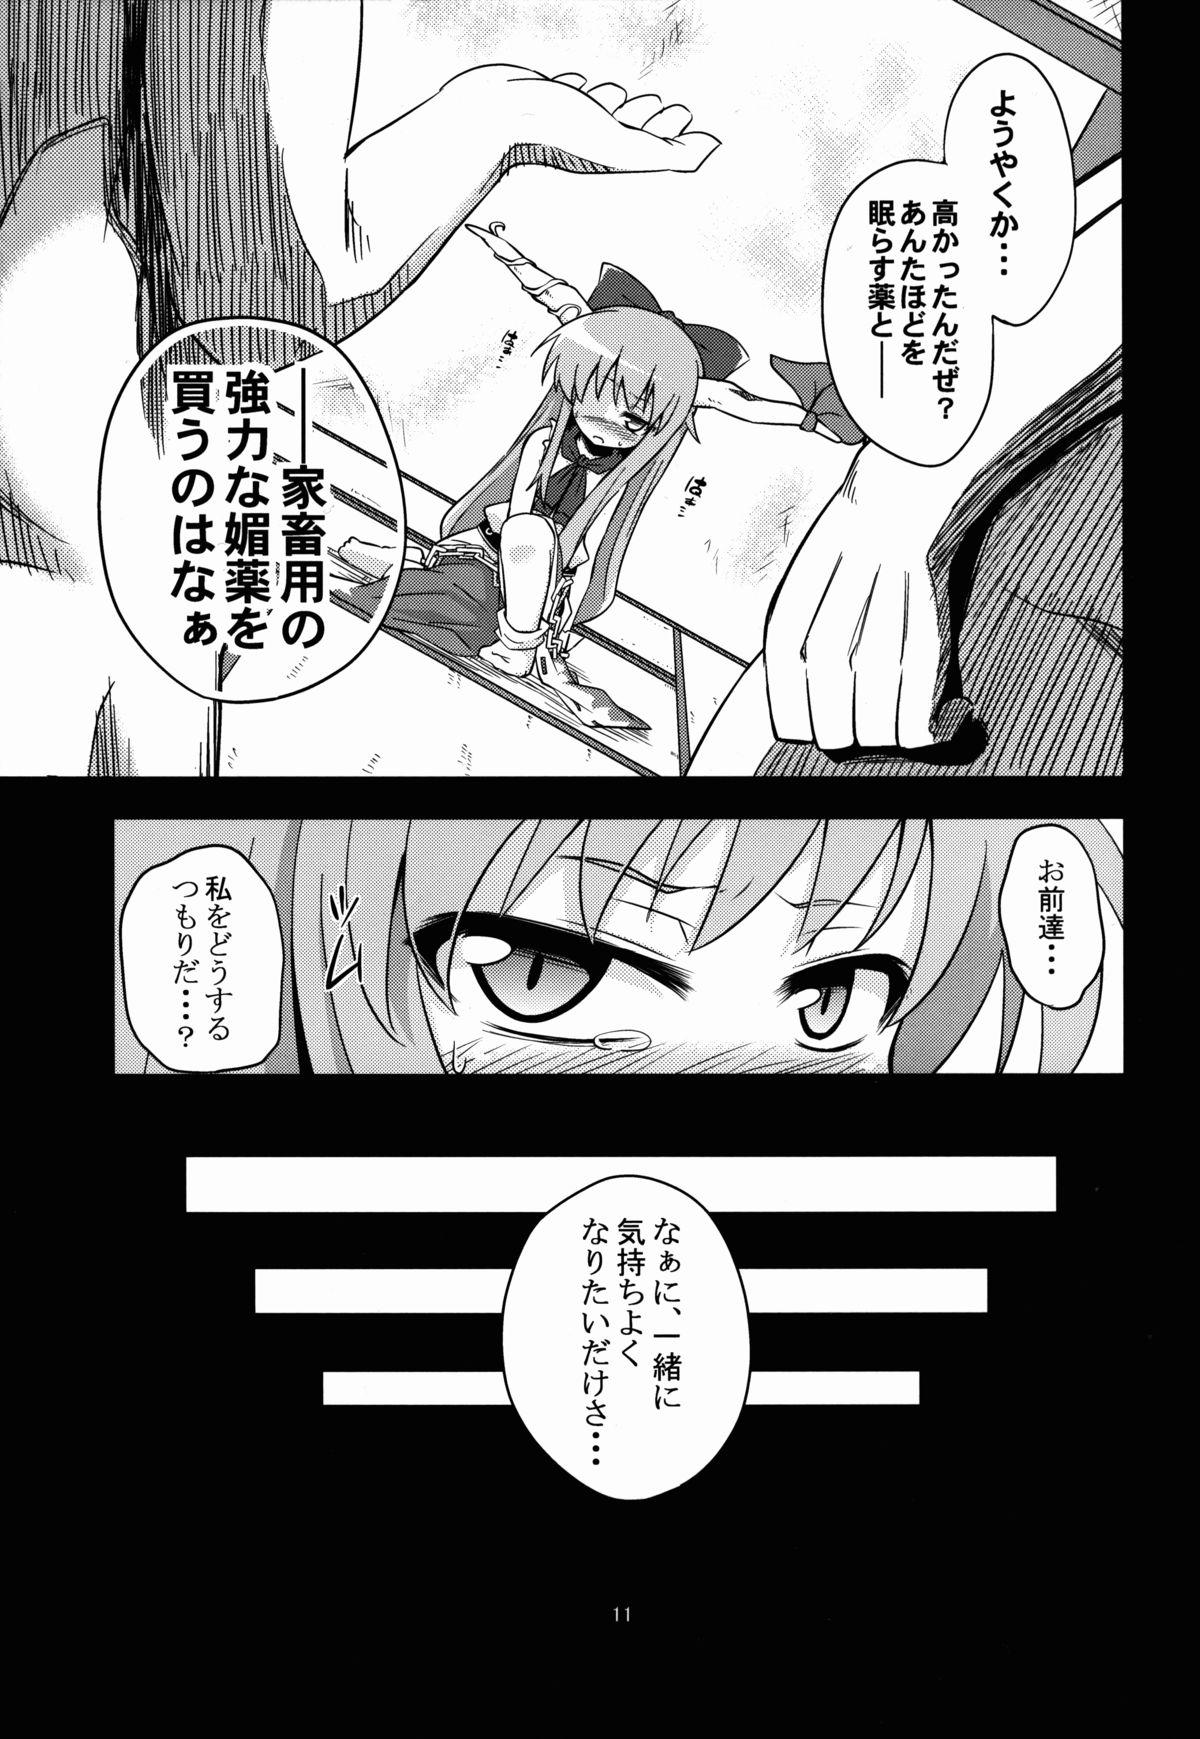 Couples 鬼犯嘘犯喜 - Touhou project Perfect Ass - Page 11